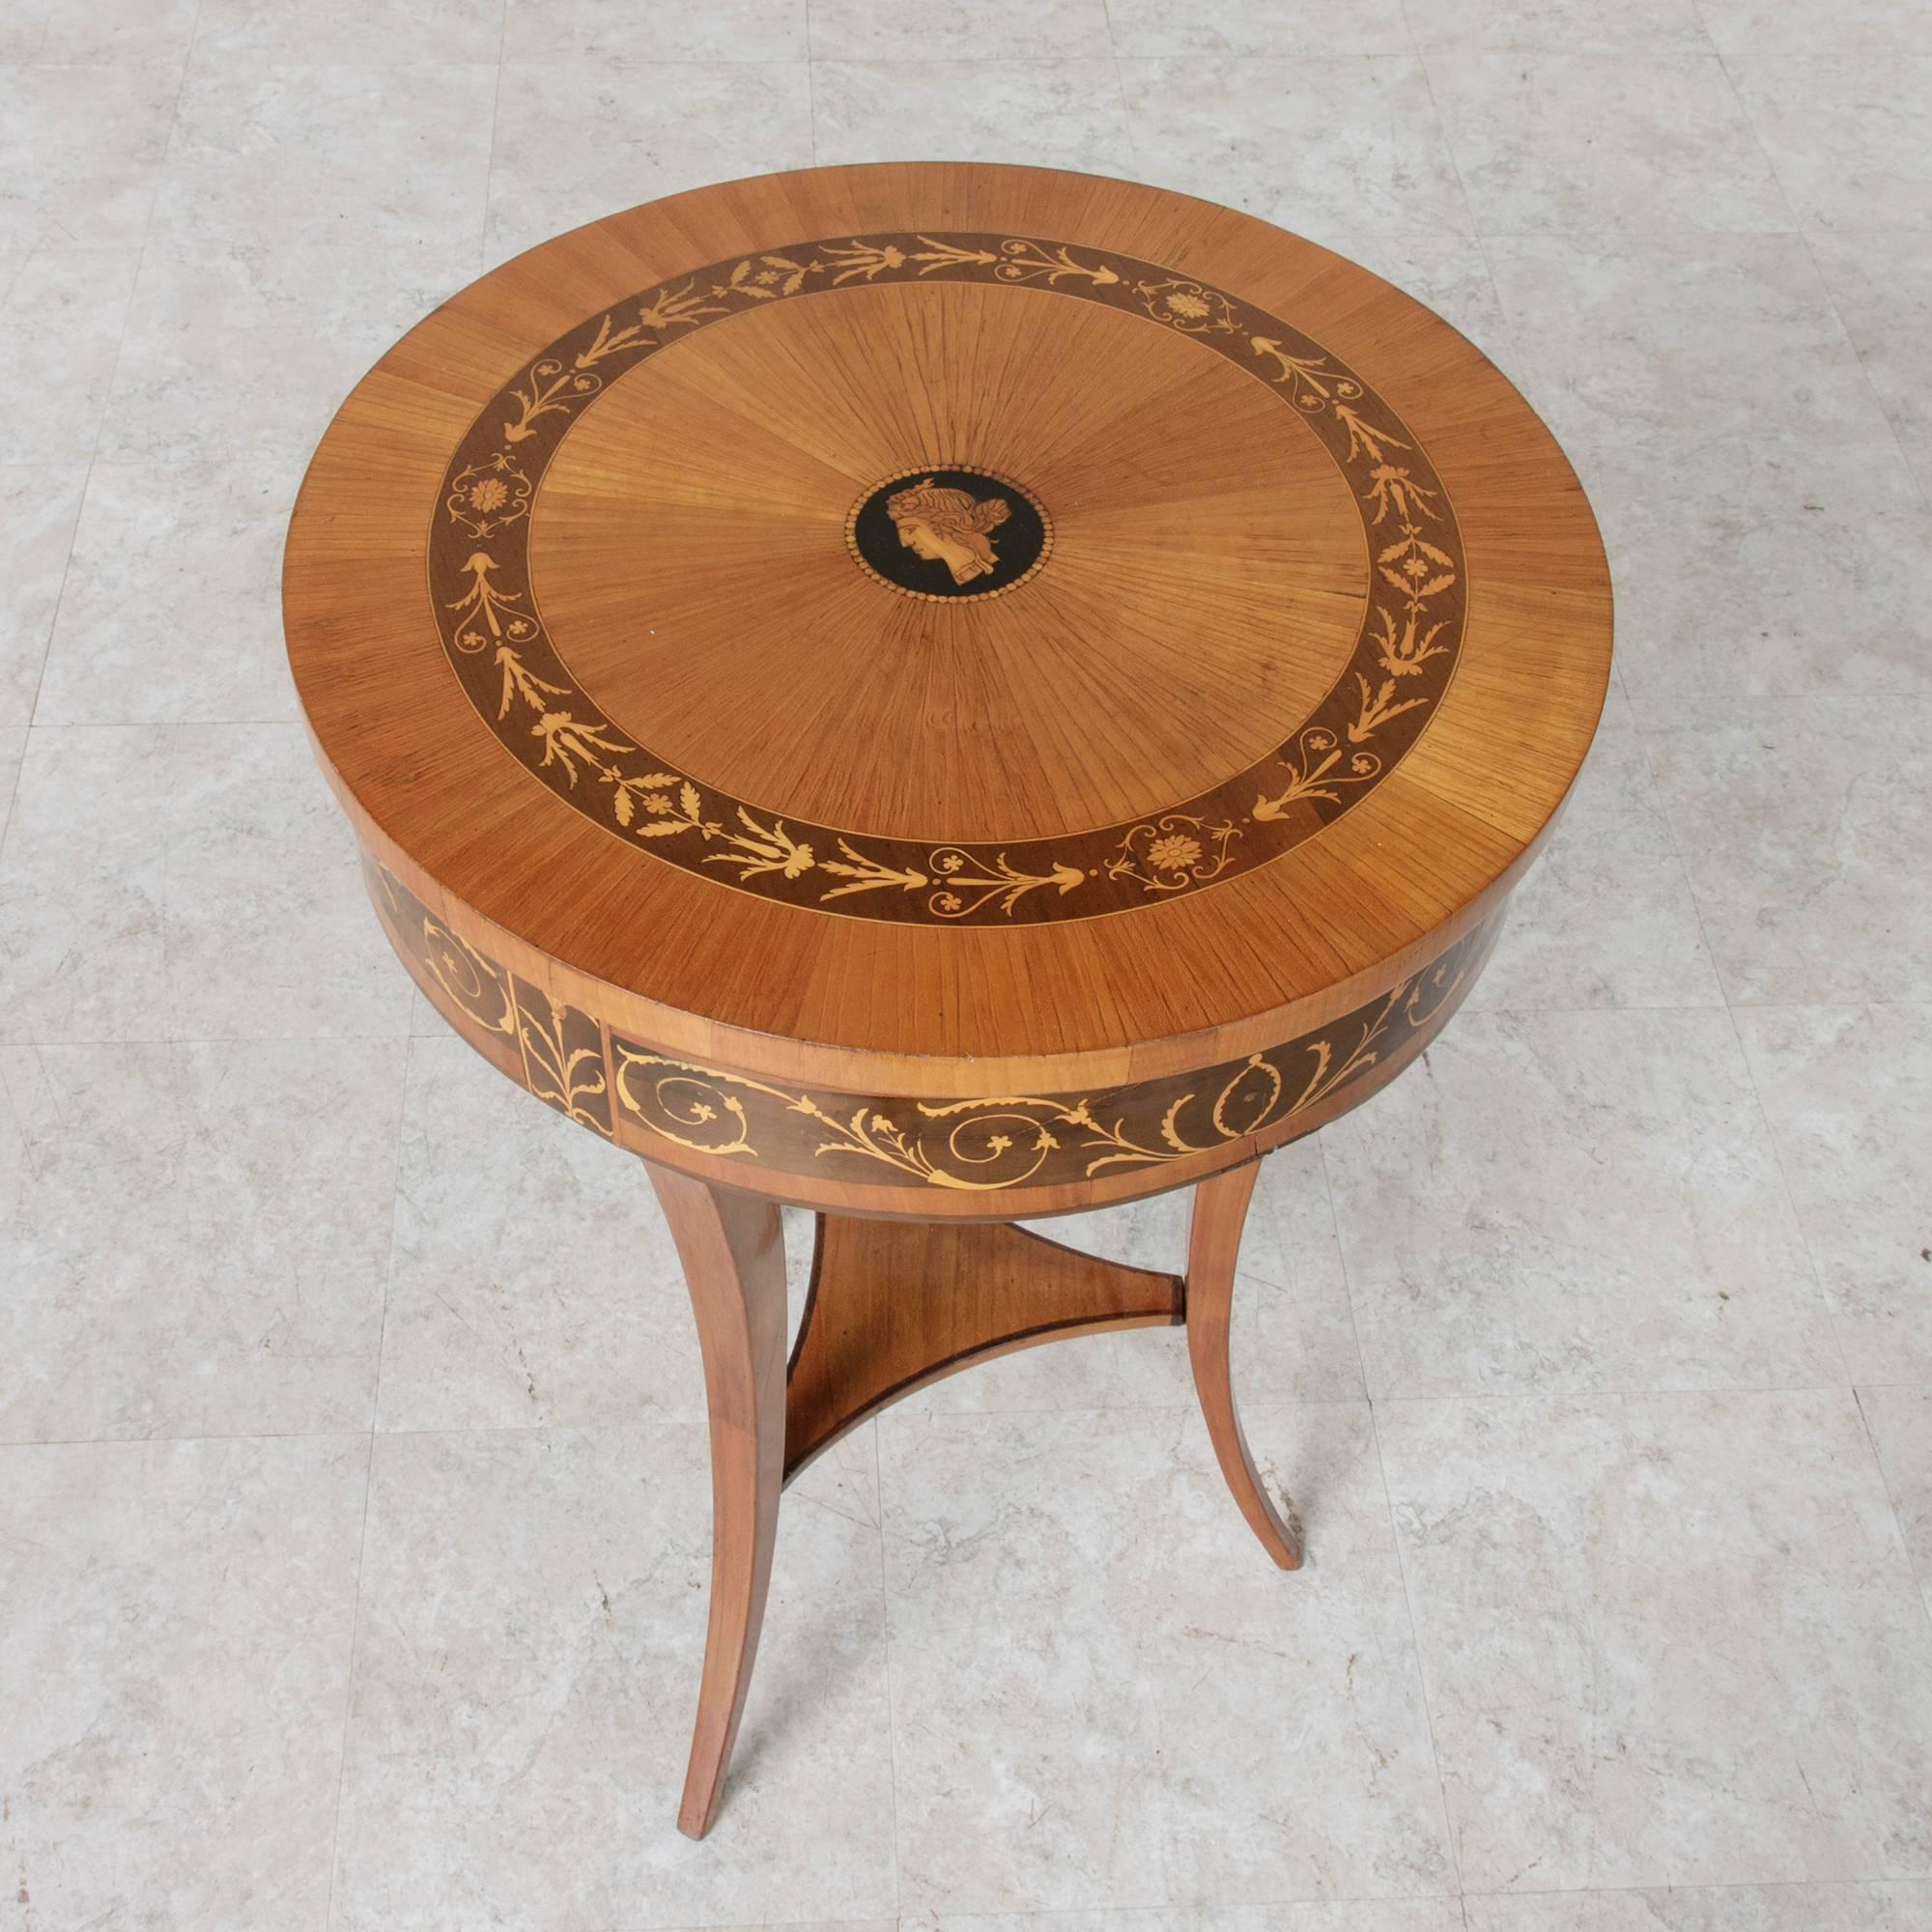 A stunning rare find! This Biedermeier period vanity table from Austria showcases a lemonwood marquetry top in a sunburst pattern. Its central ebony medallion features an inlaid Grecian profile of a classic female figure. A band of sycamore wood